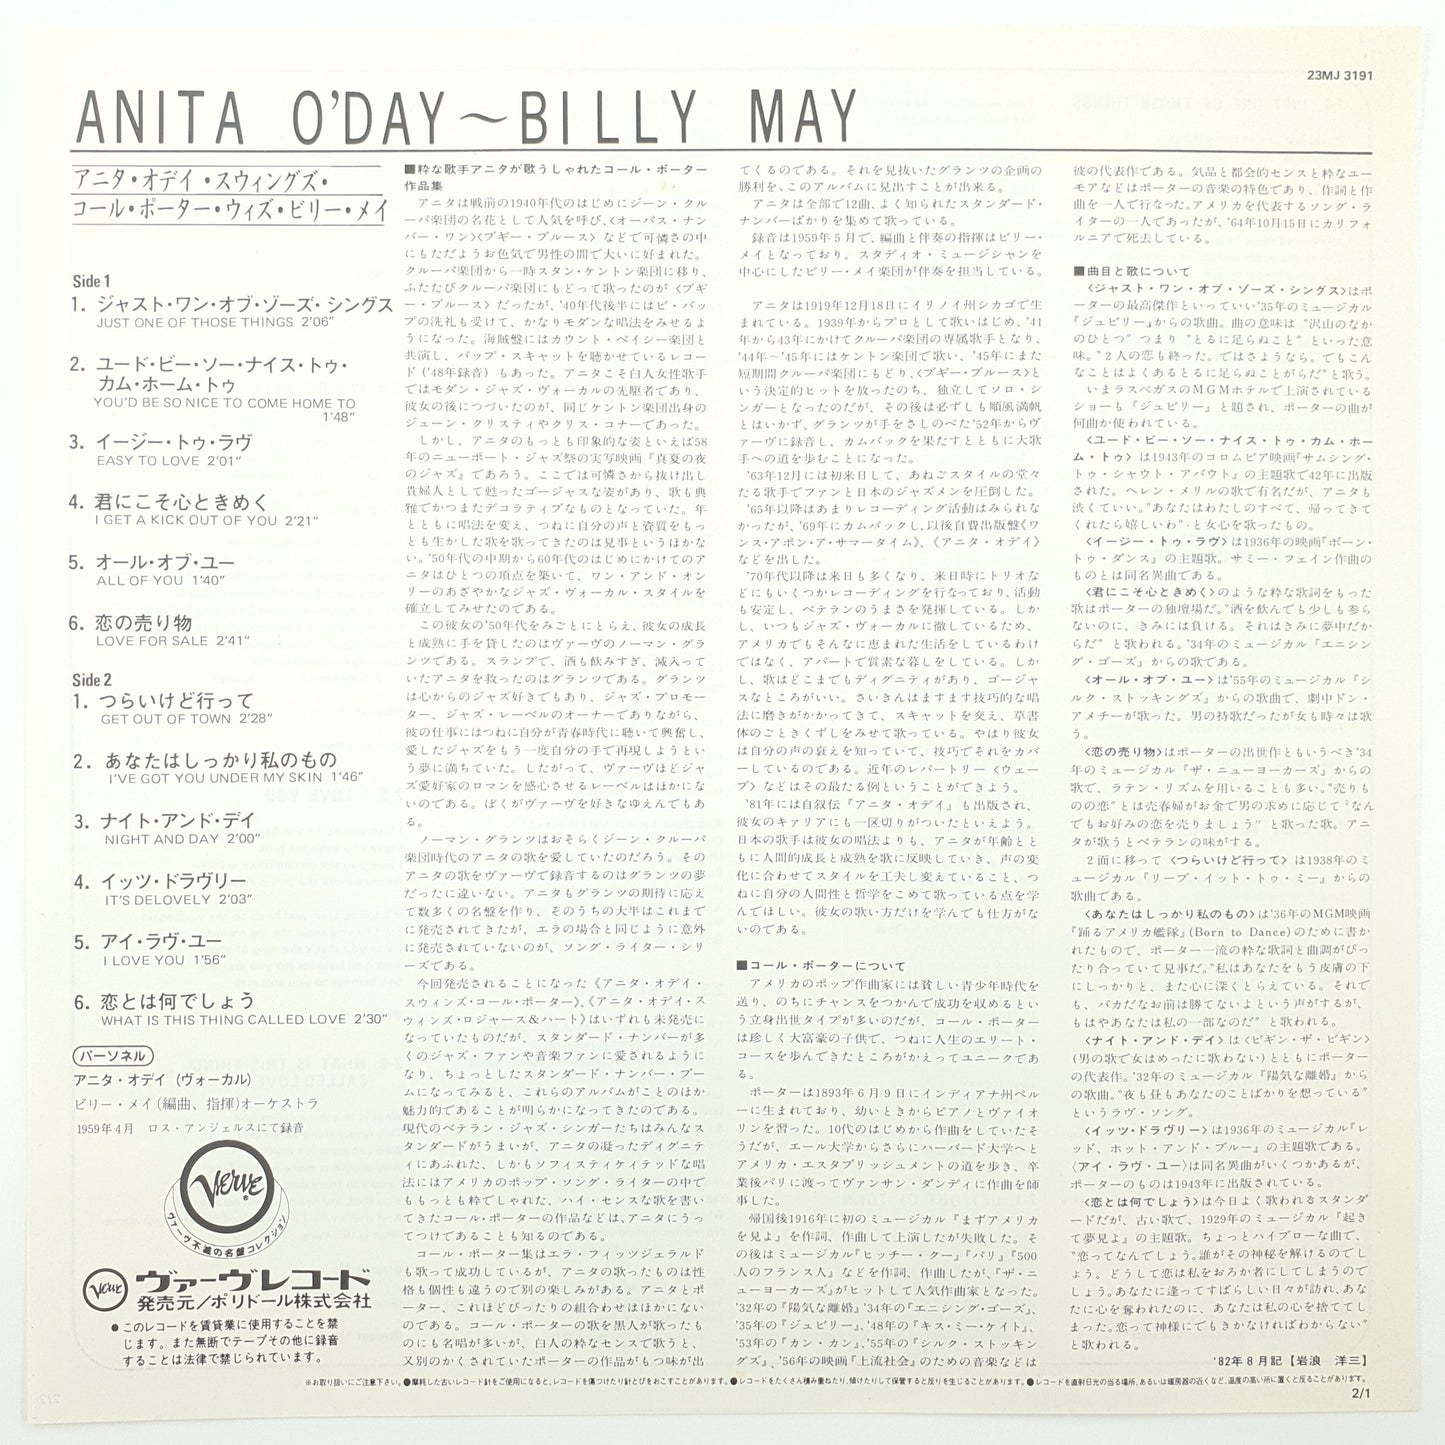 Anita O'Day With Billy May – Swings Cole Porter